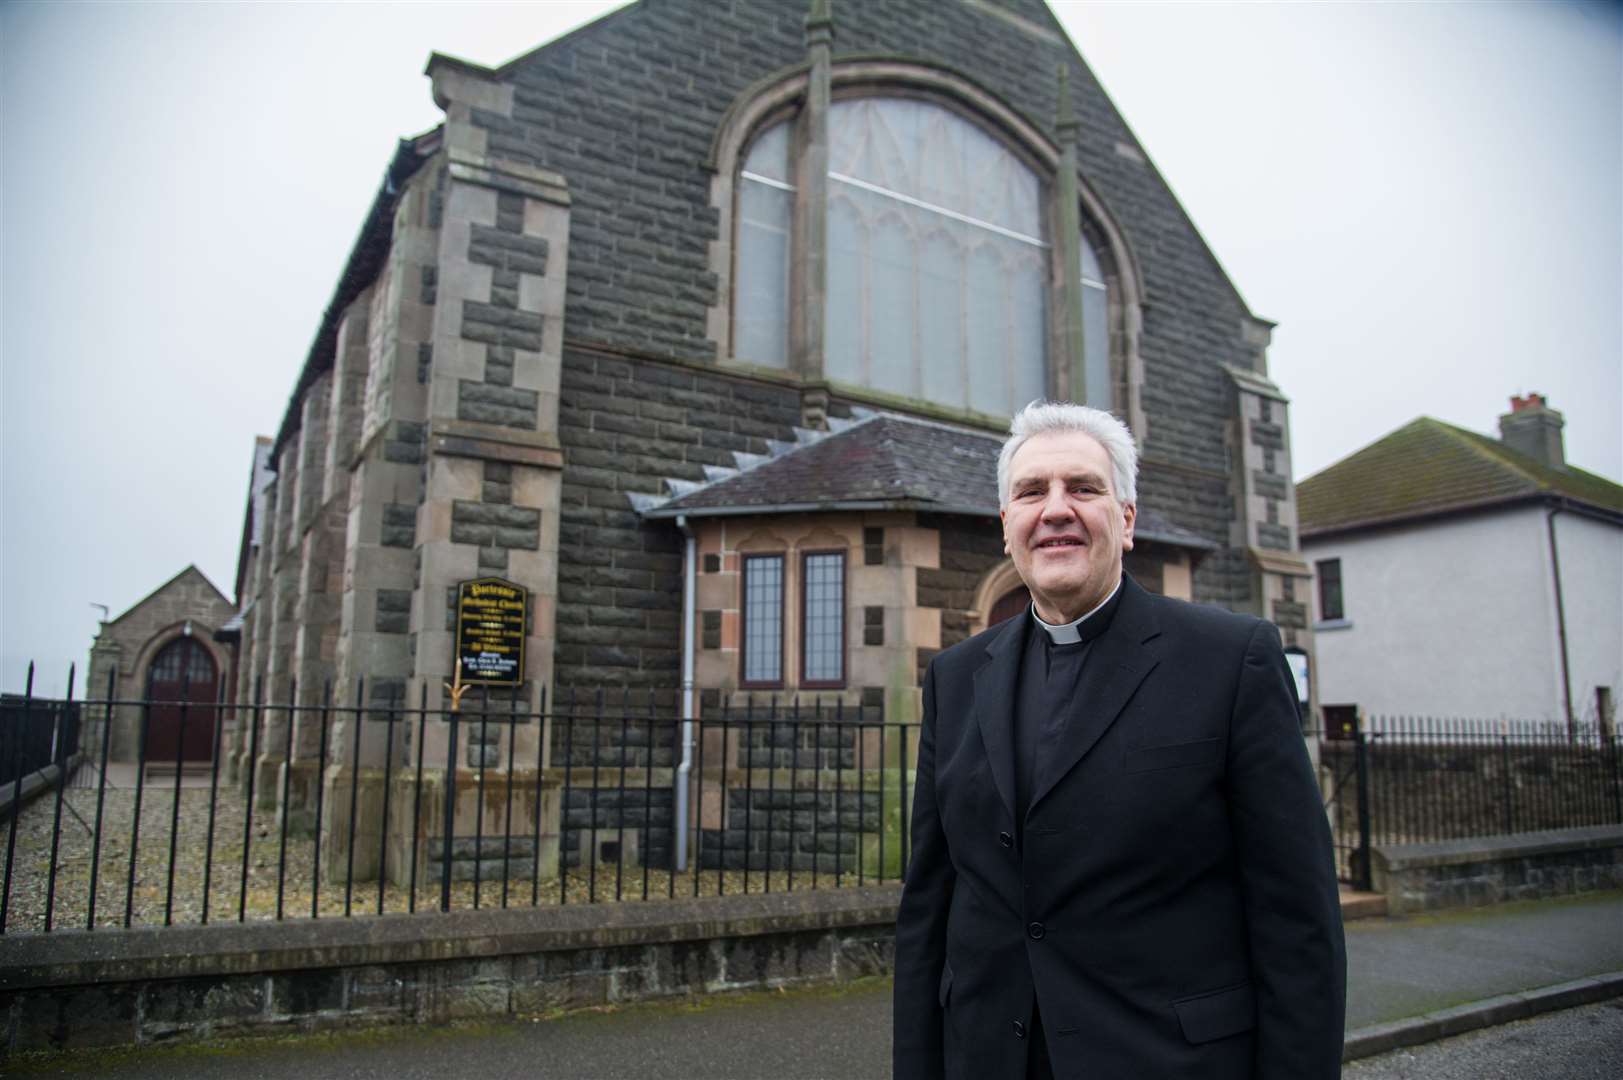 Moray Coast Methodist Church minister Rev Jon Garde has welcomed the £12,000 boost from the fund. Picture: Becky Saunderson